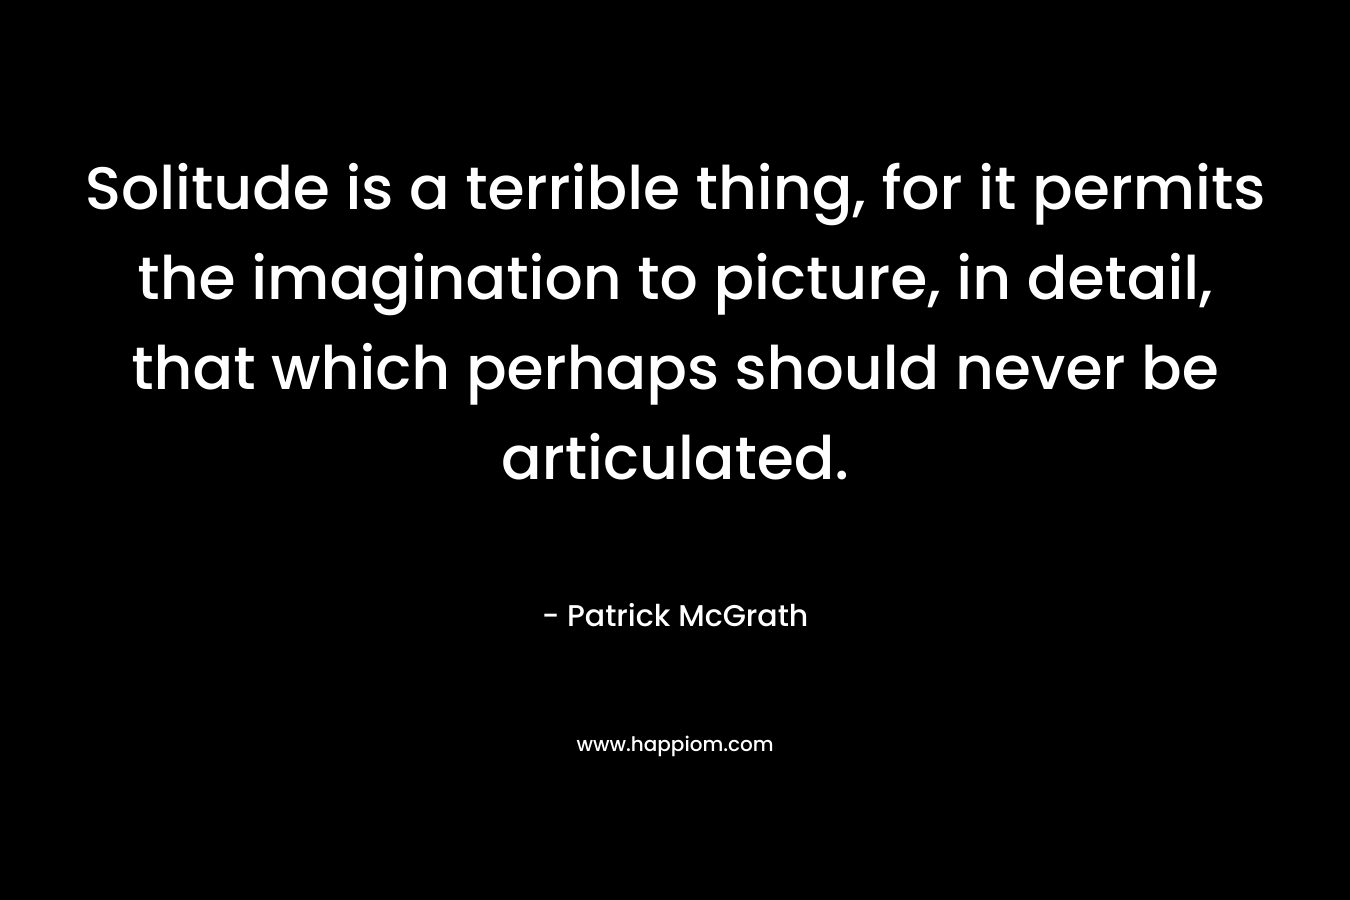 Solitude is a terrible thing, for it permits the imagination to picture, in detail, that which perhaps should never be articulated. – Patrick McGrath